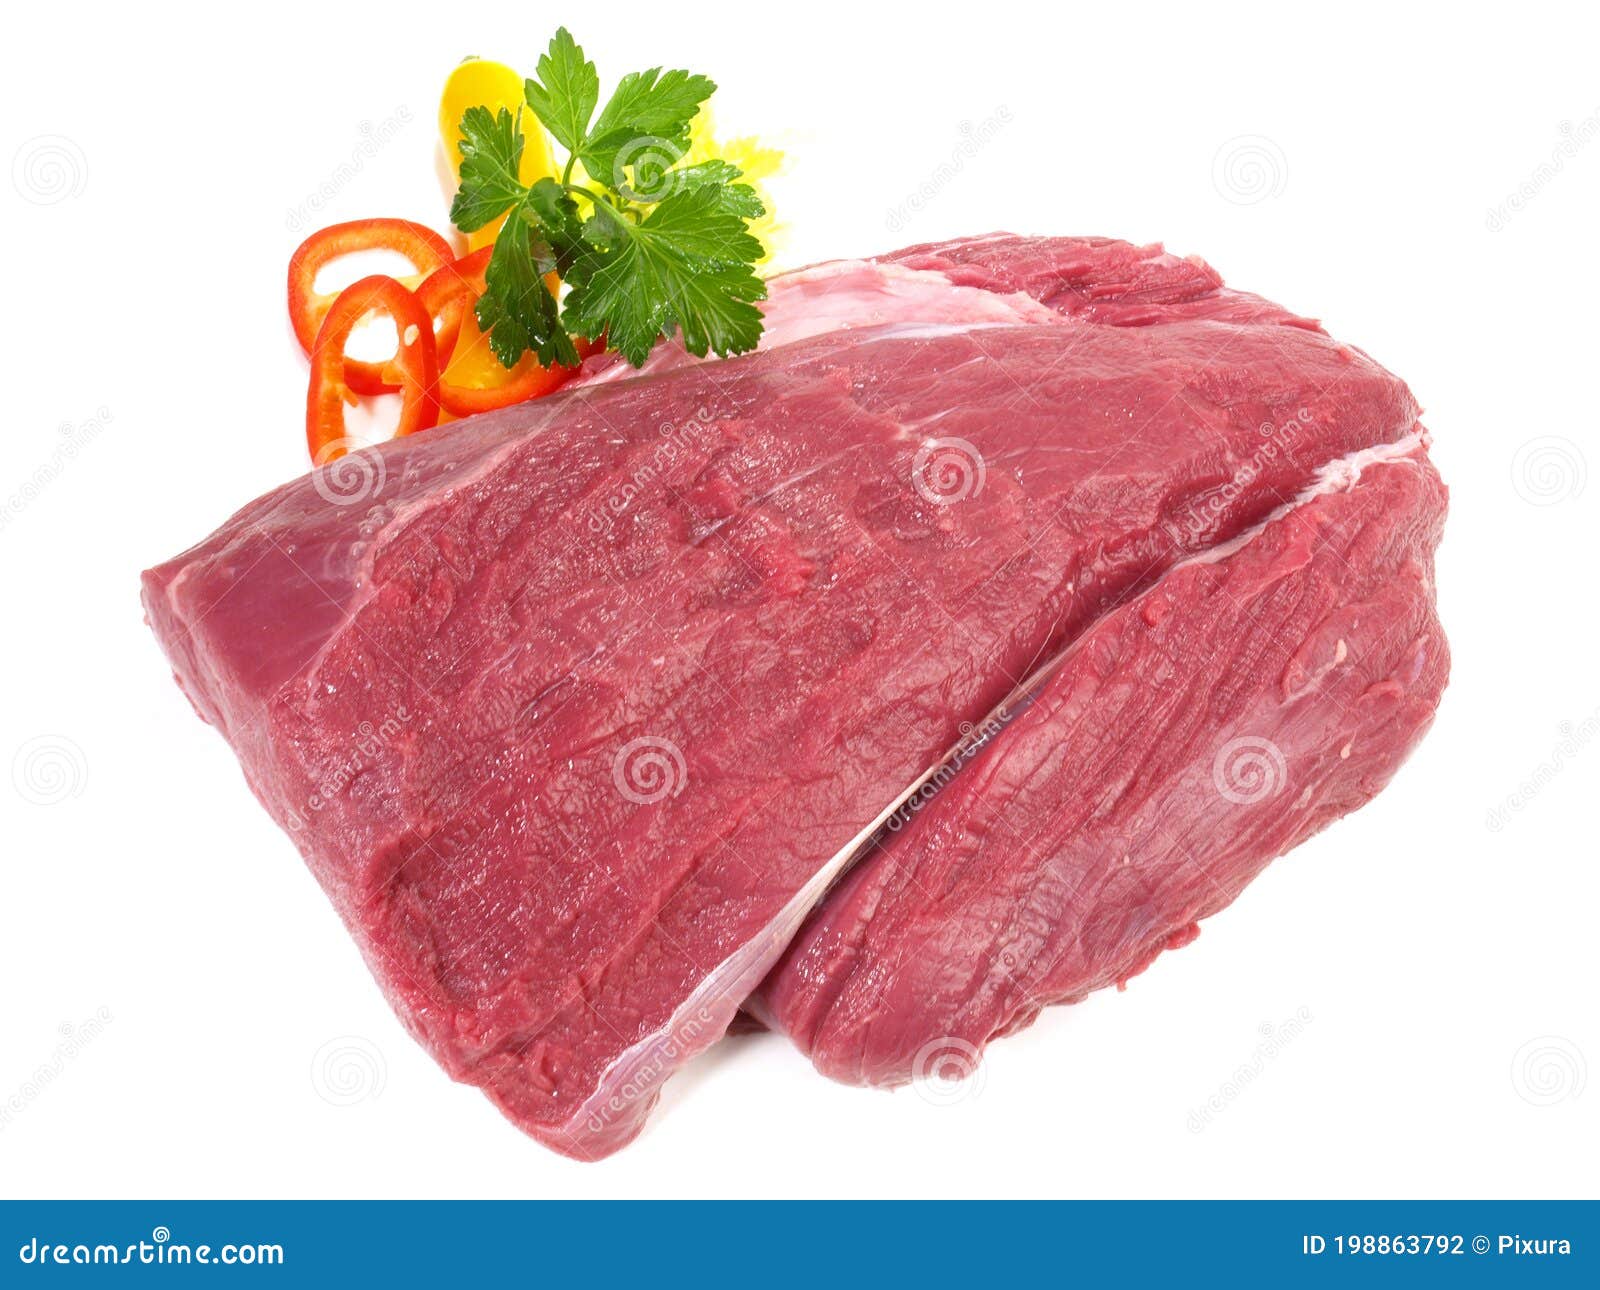 Raw Bison Fillet Meat - Raw Buffalo Meat On White Background Stock Photo -  Image of isolated, lean: 198863792